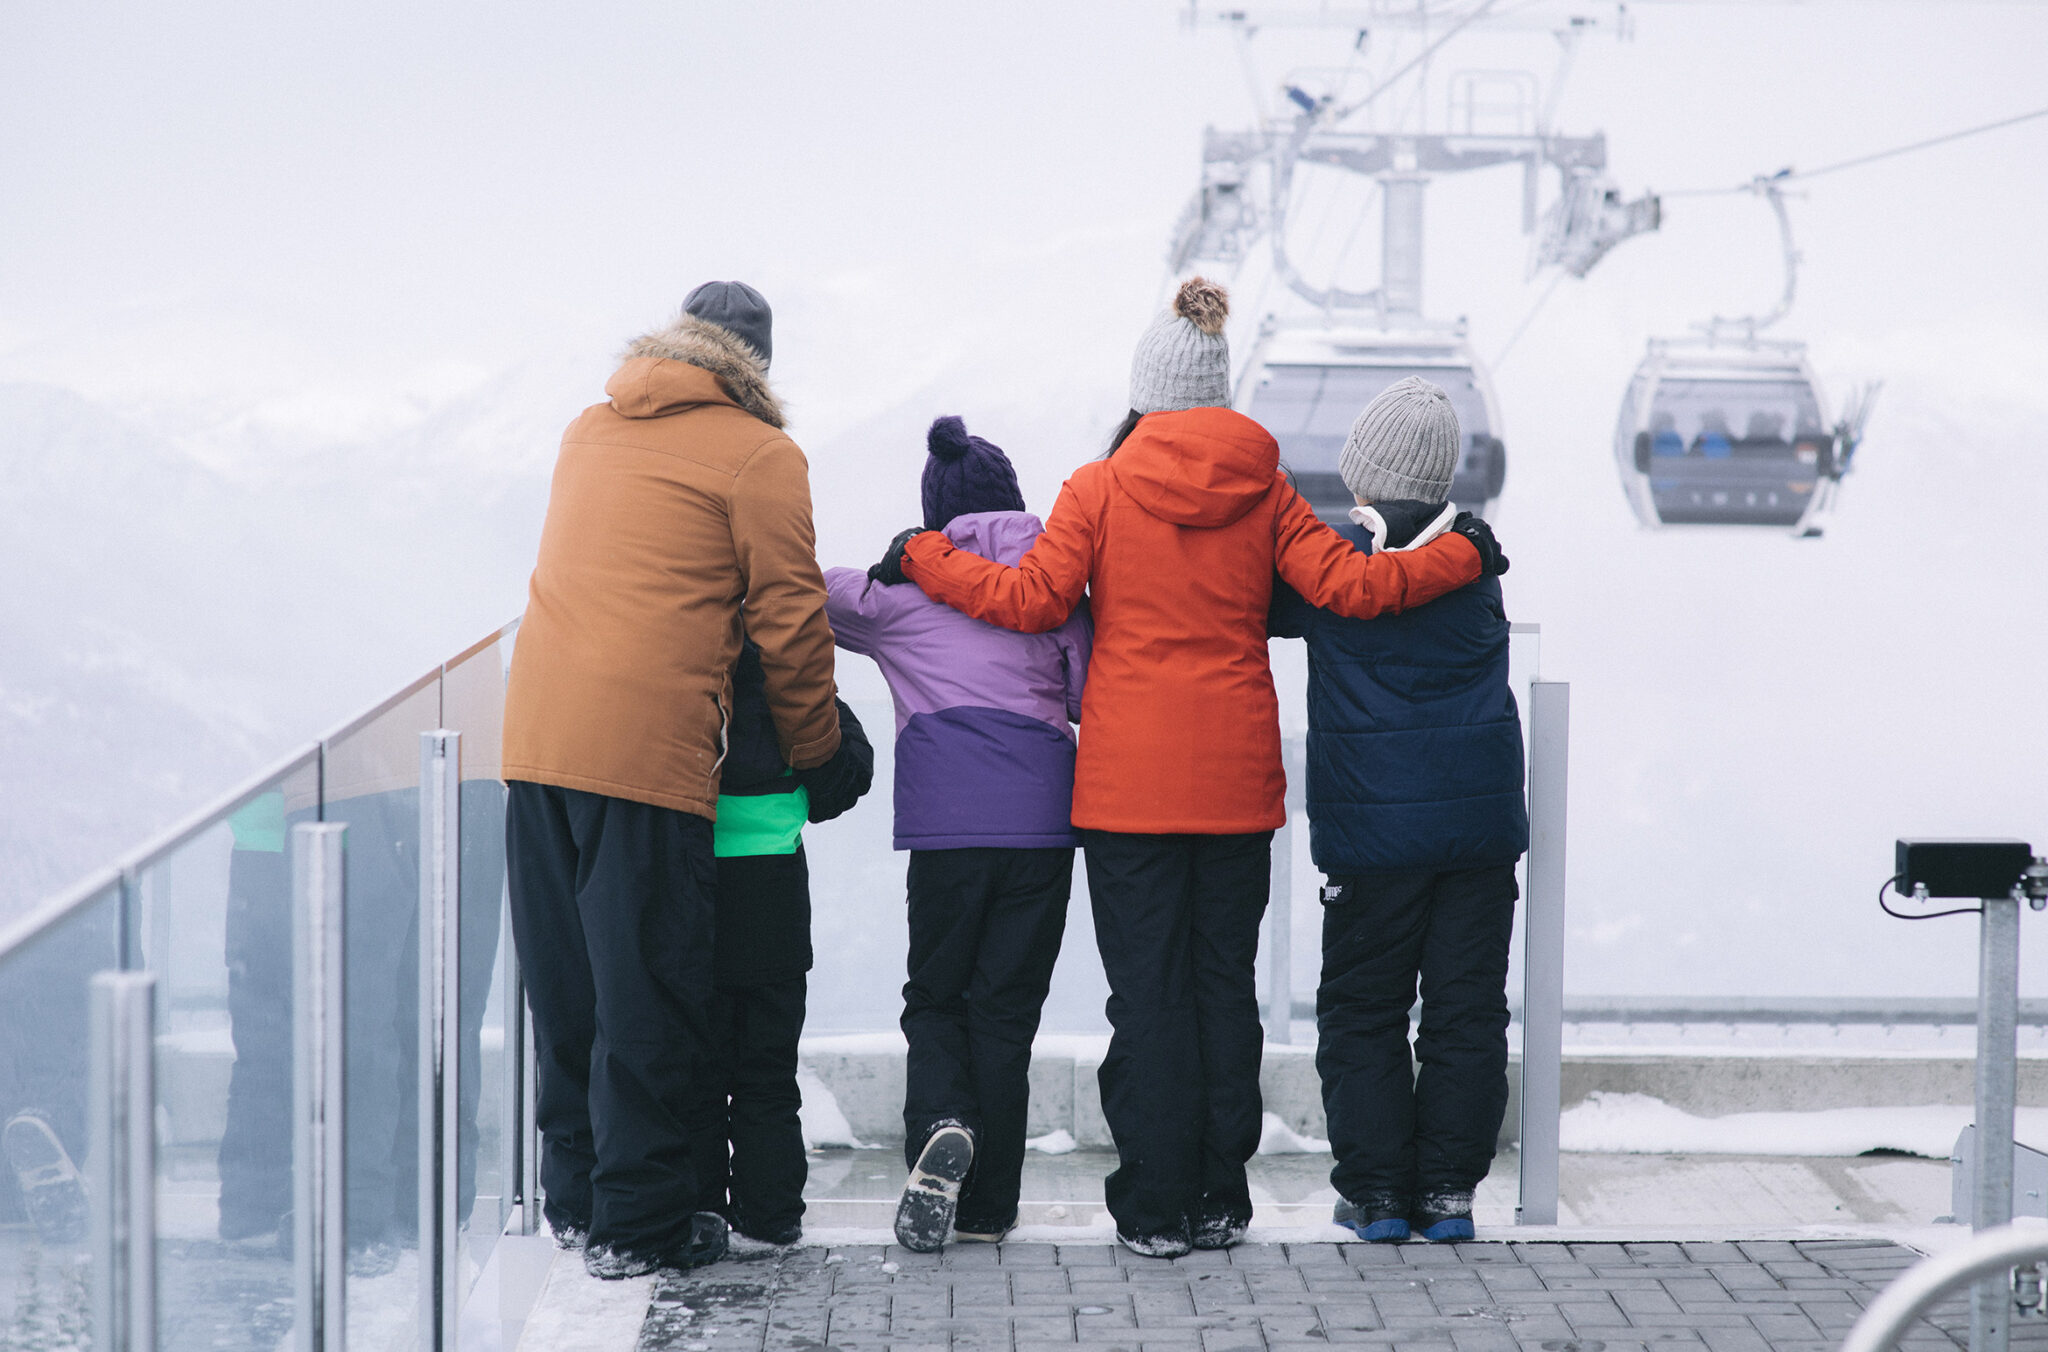 A family sightseeing in winter on Whistler Blackcomb stand looking out at the gondolas coming in.